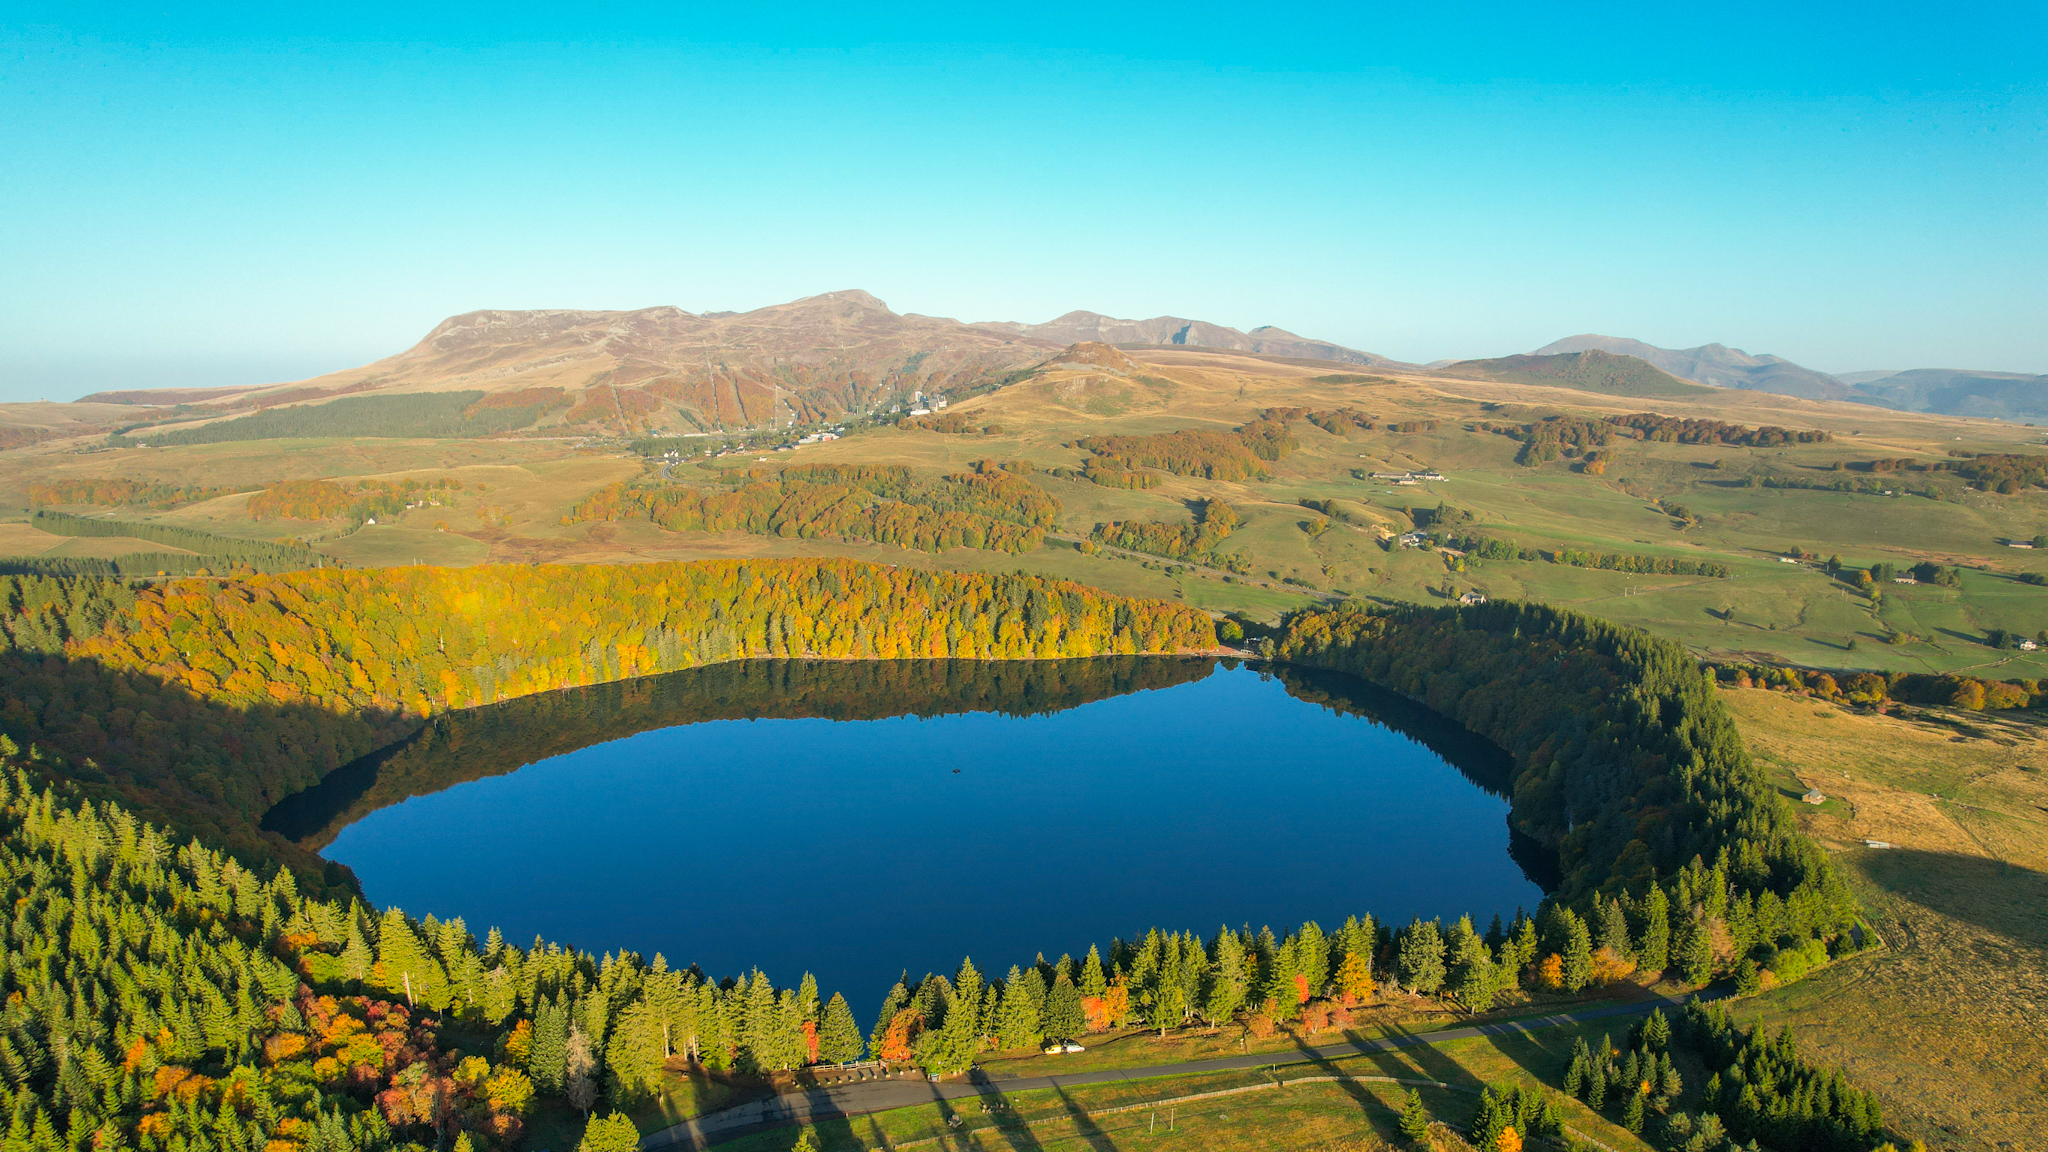 Morning colors on Lac Pavin in the fall